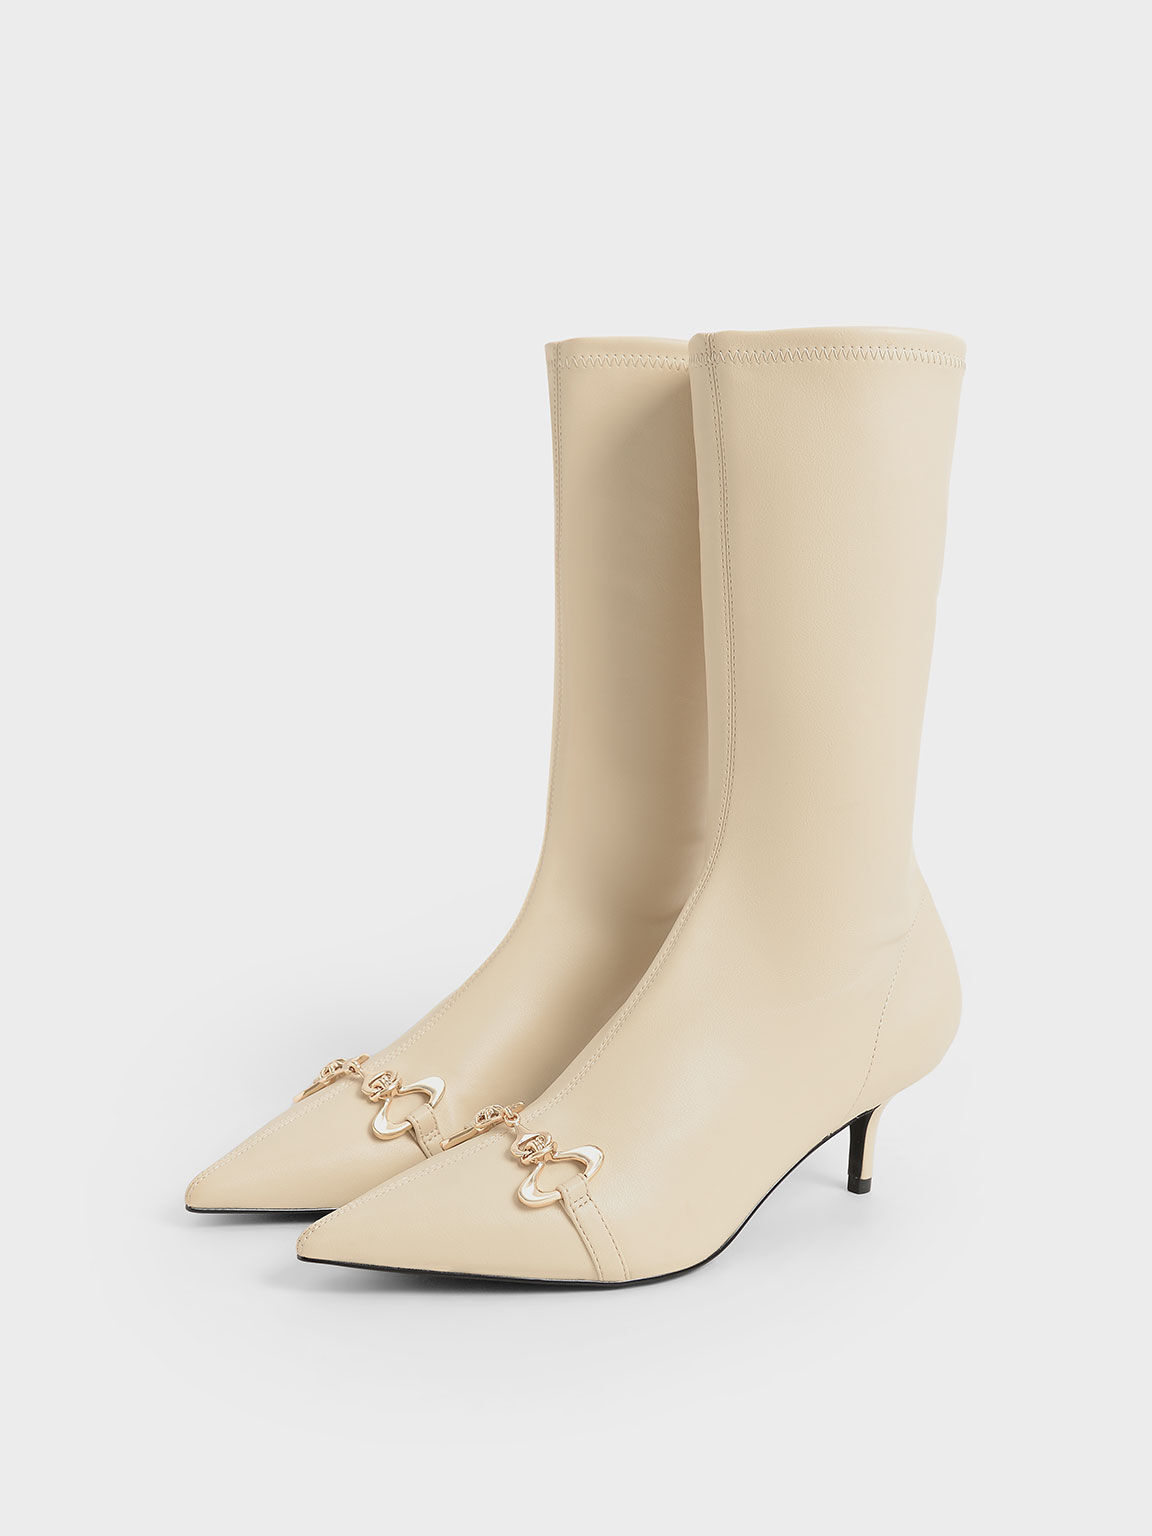 Elery Slip-On Ankle Boots, Sand, hi-res